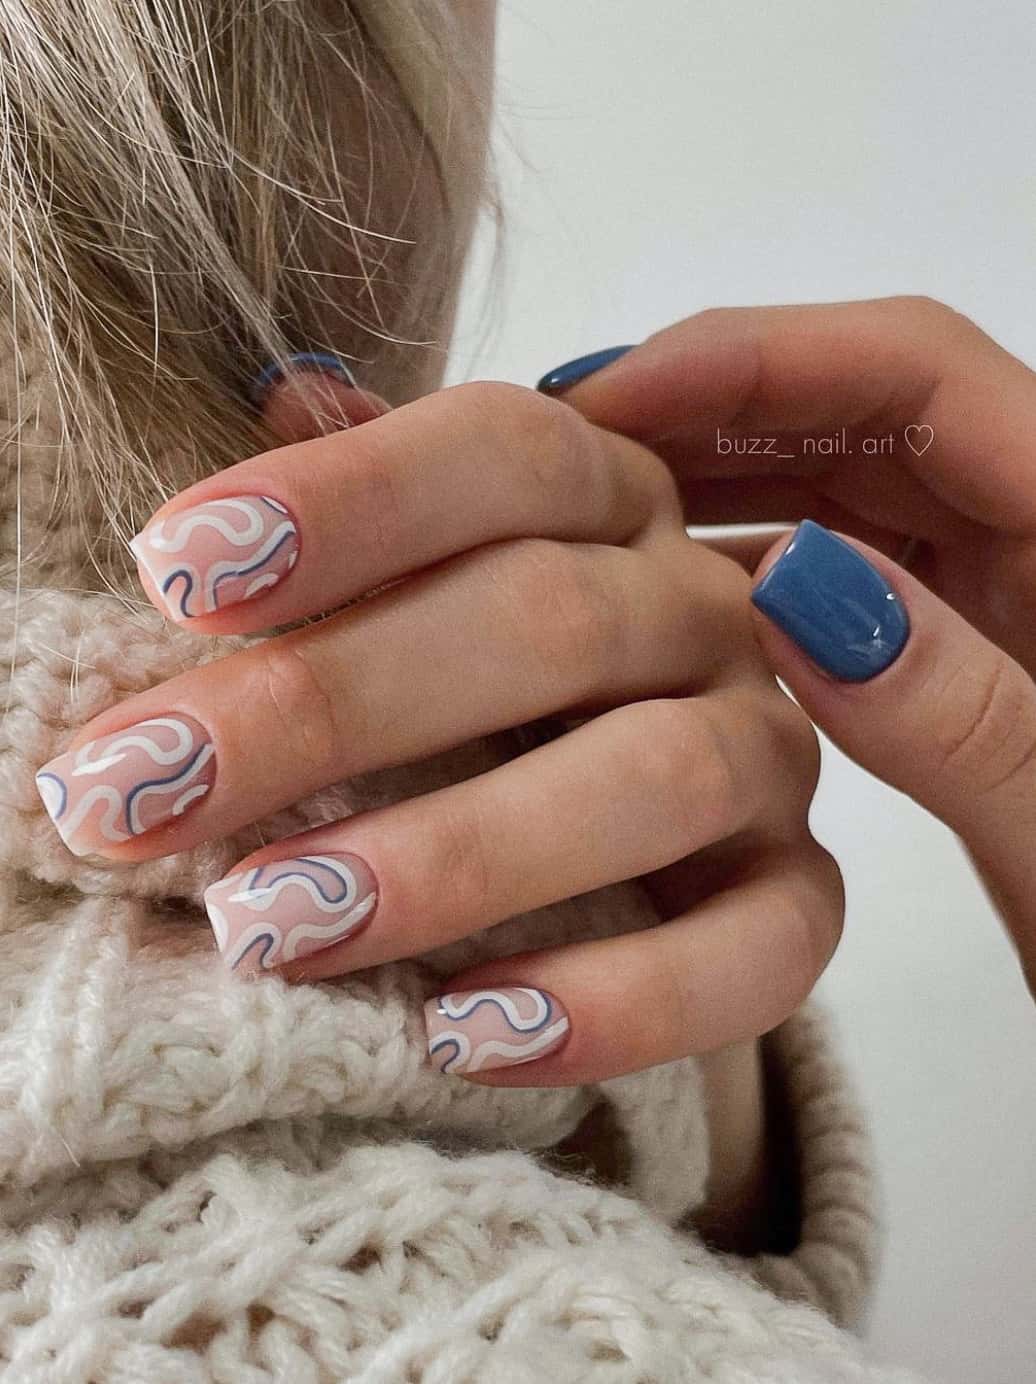 Two hands, one with solid blue polished nails and the other with a nude base and white and blue swirls